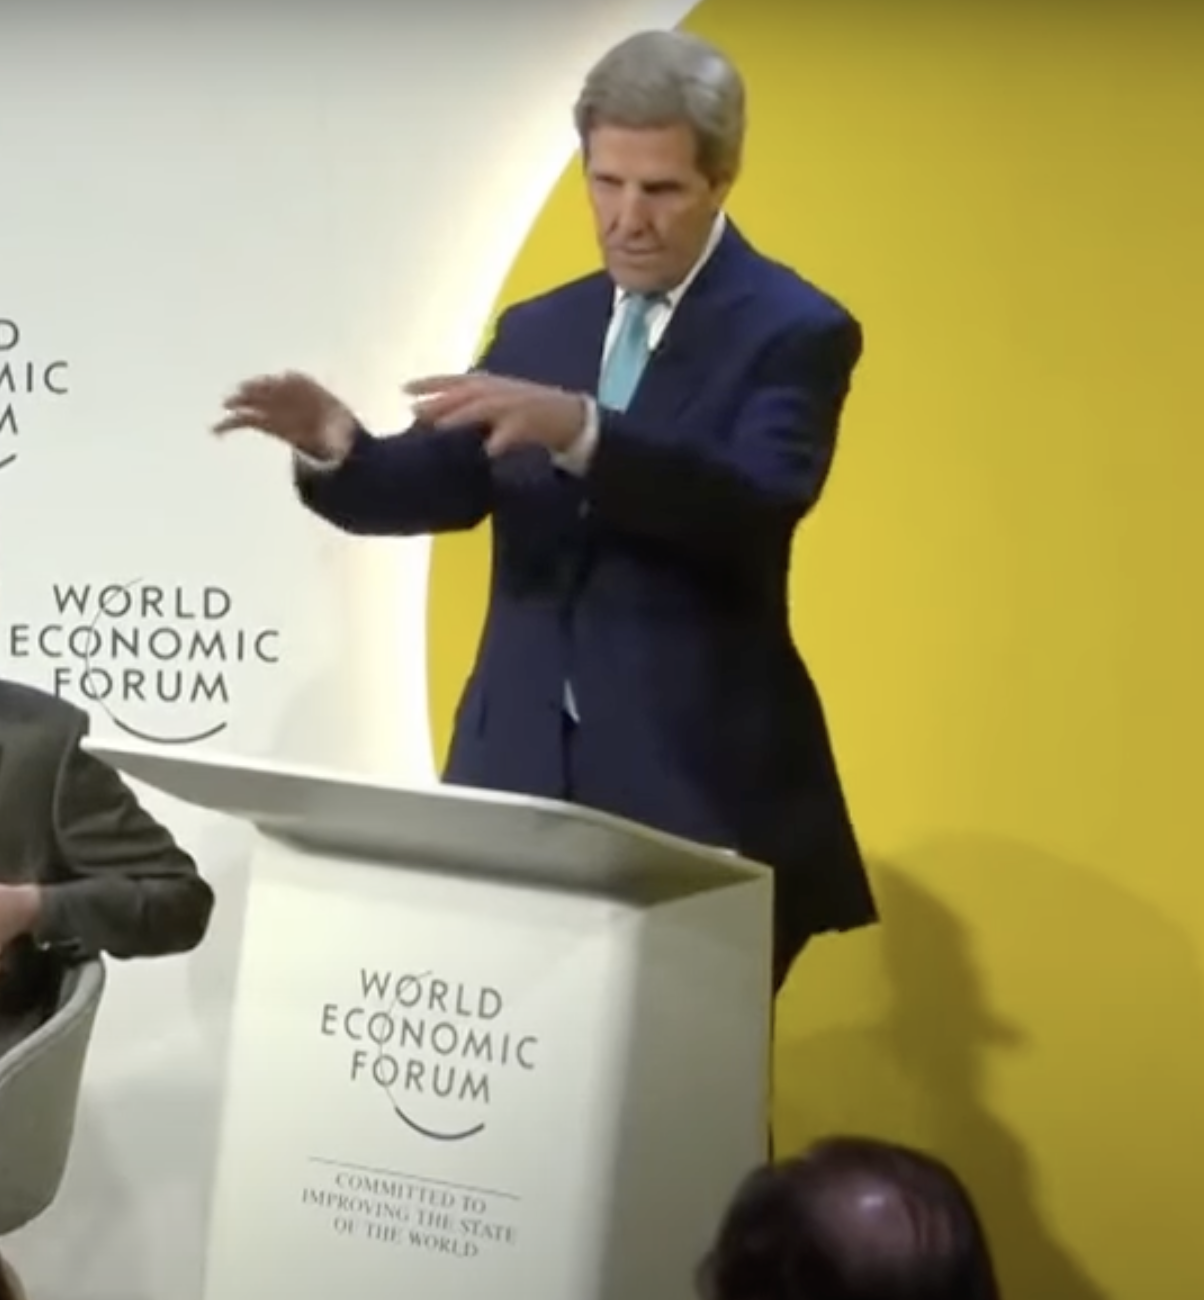 Watch: John Kerry Says WEF Davos Elite Are Like ‘Extraterrestrials’ Here to ‘Save the Planet’